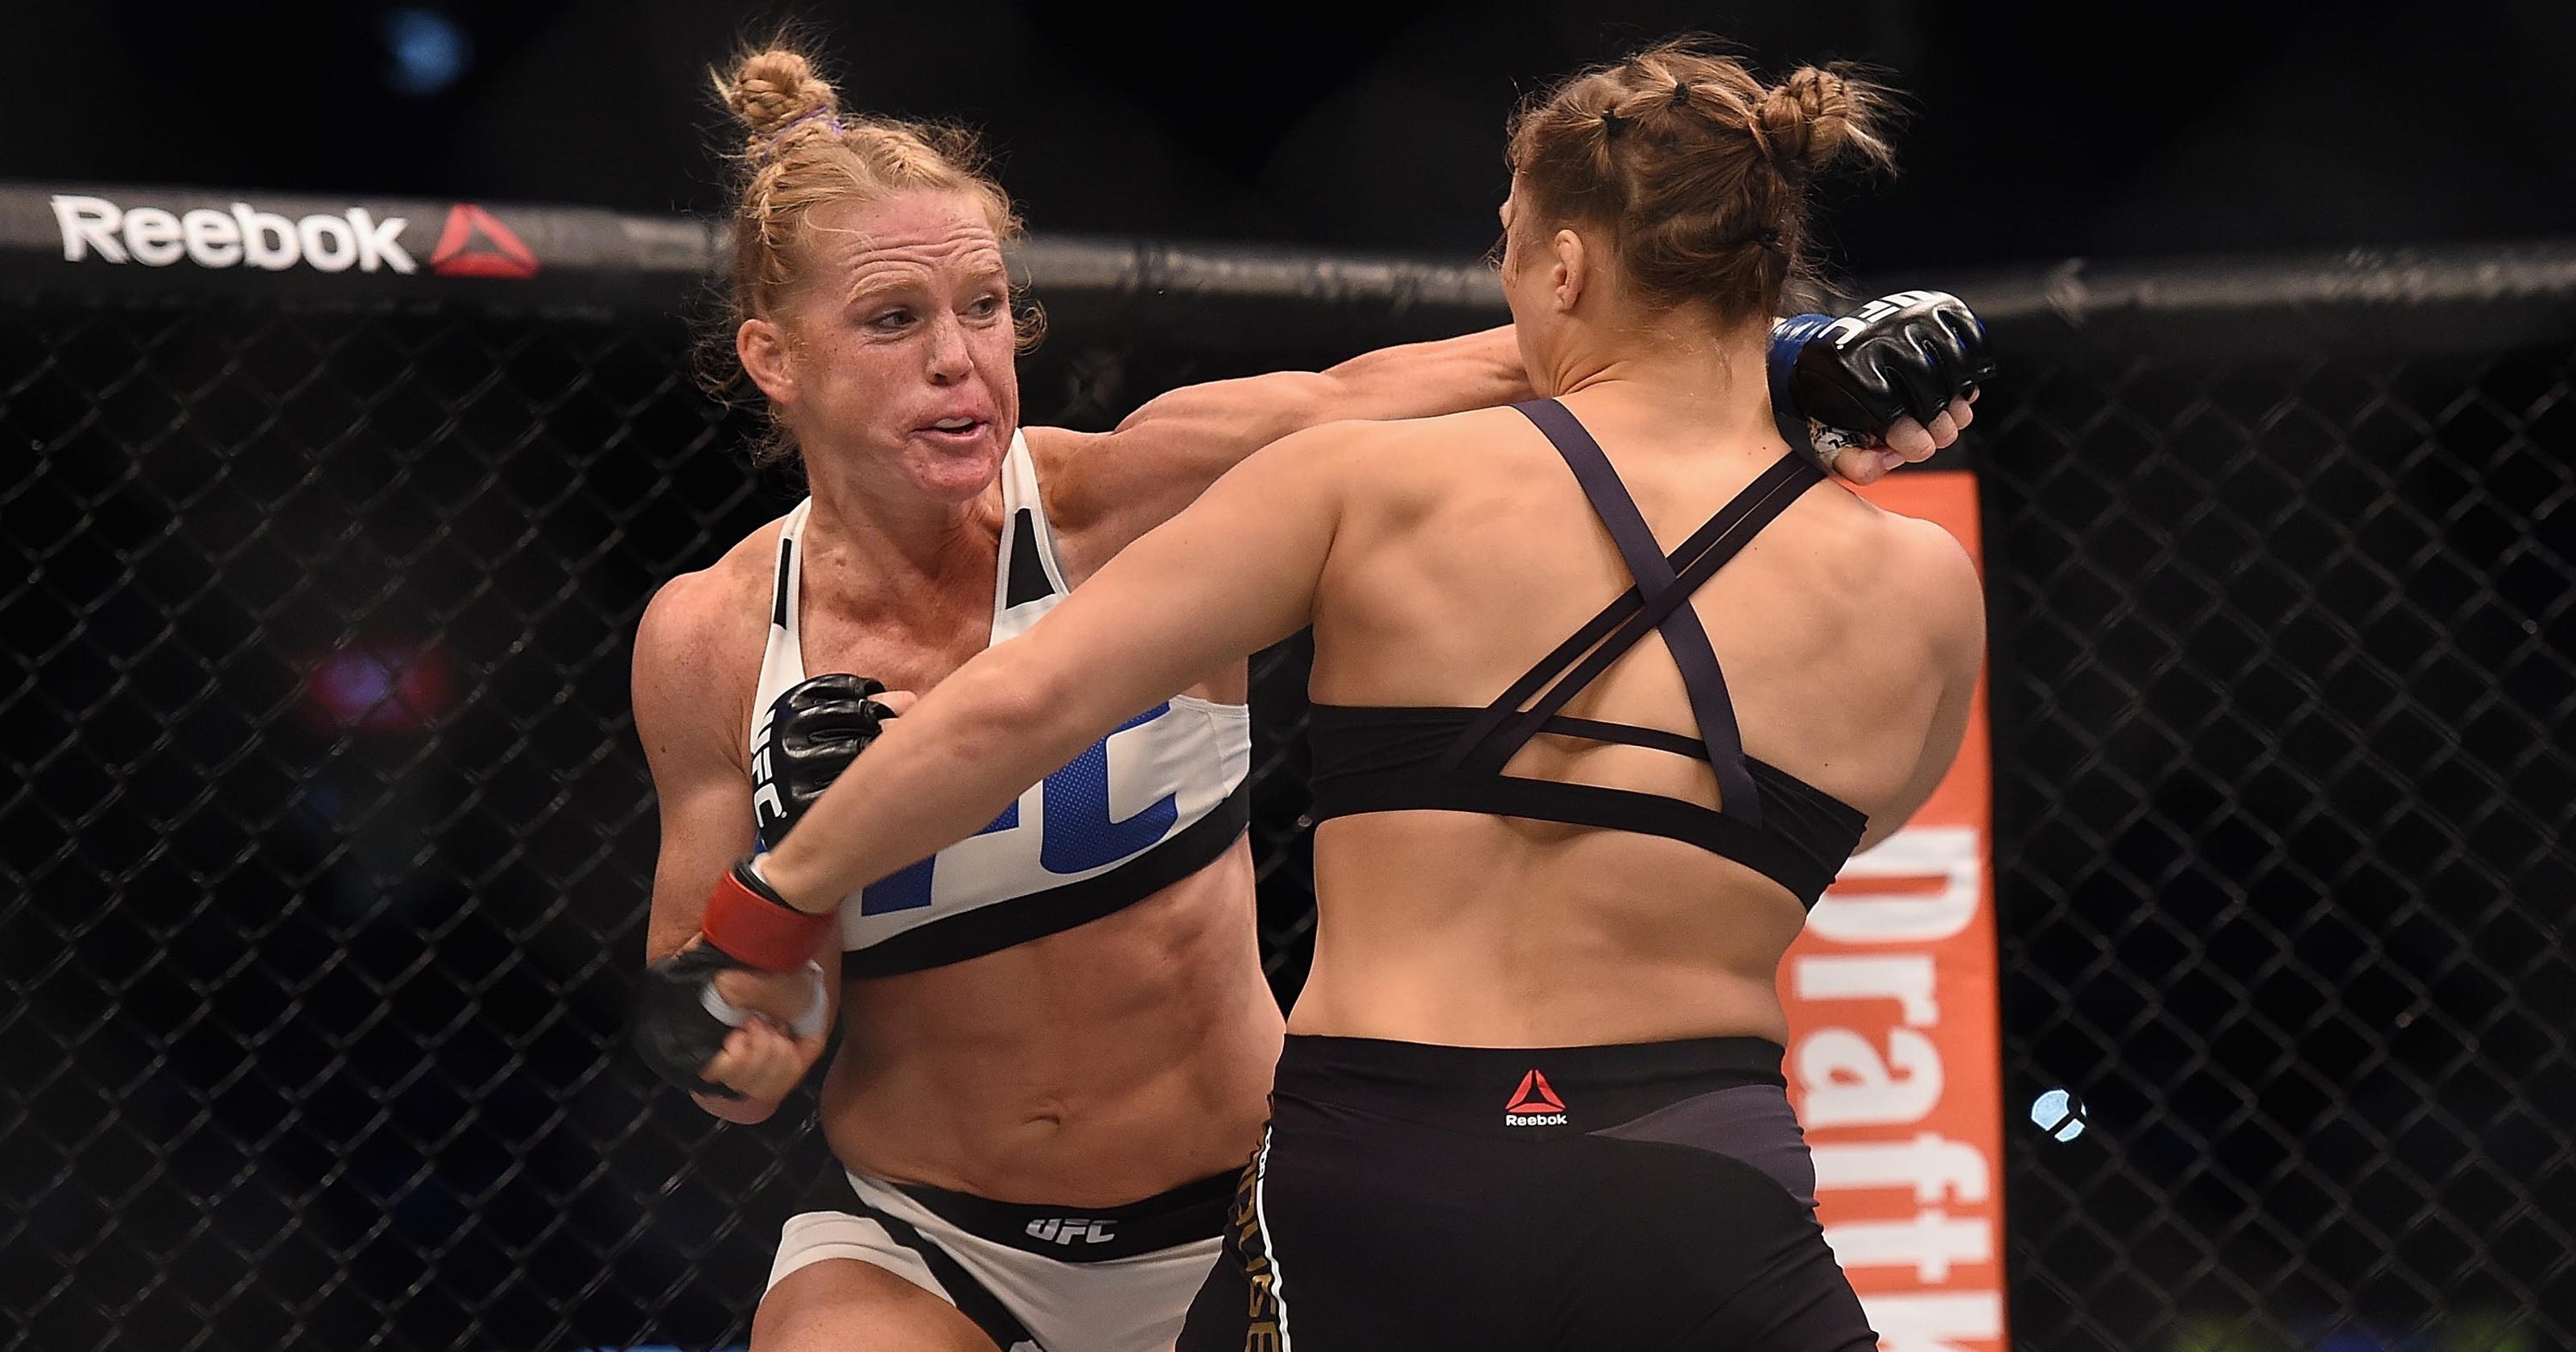 Holly Holm's team won 'six figure' sum betting on their fighter